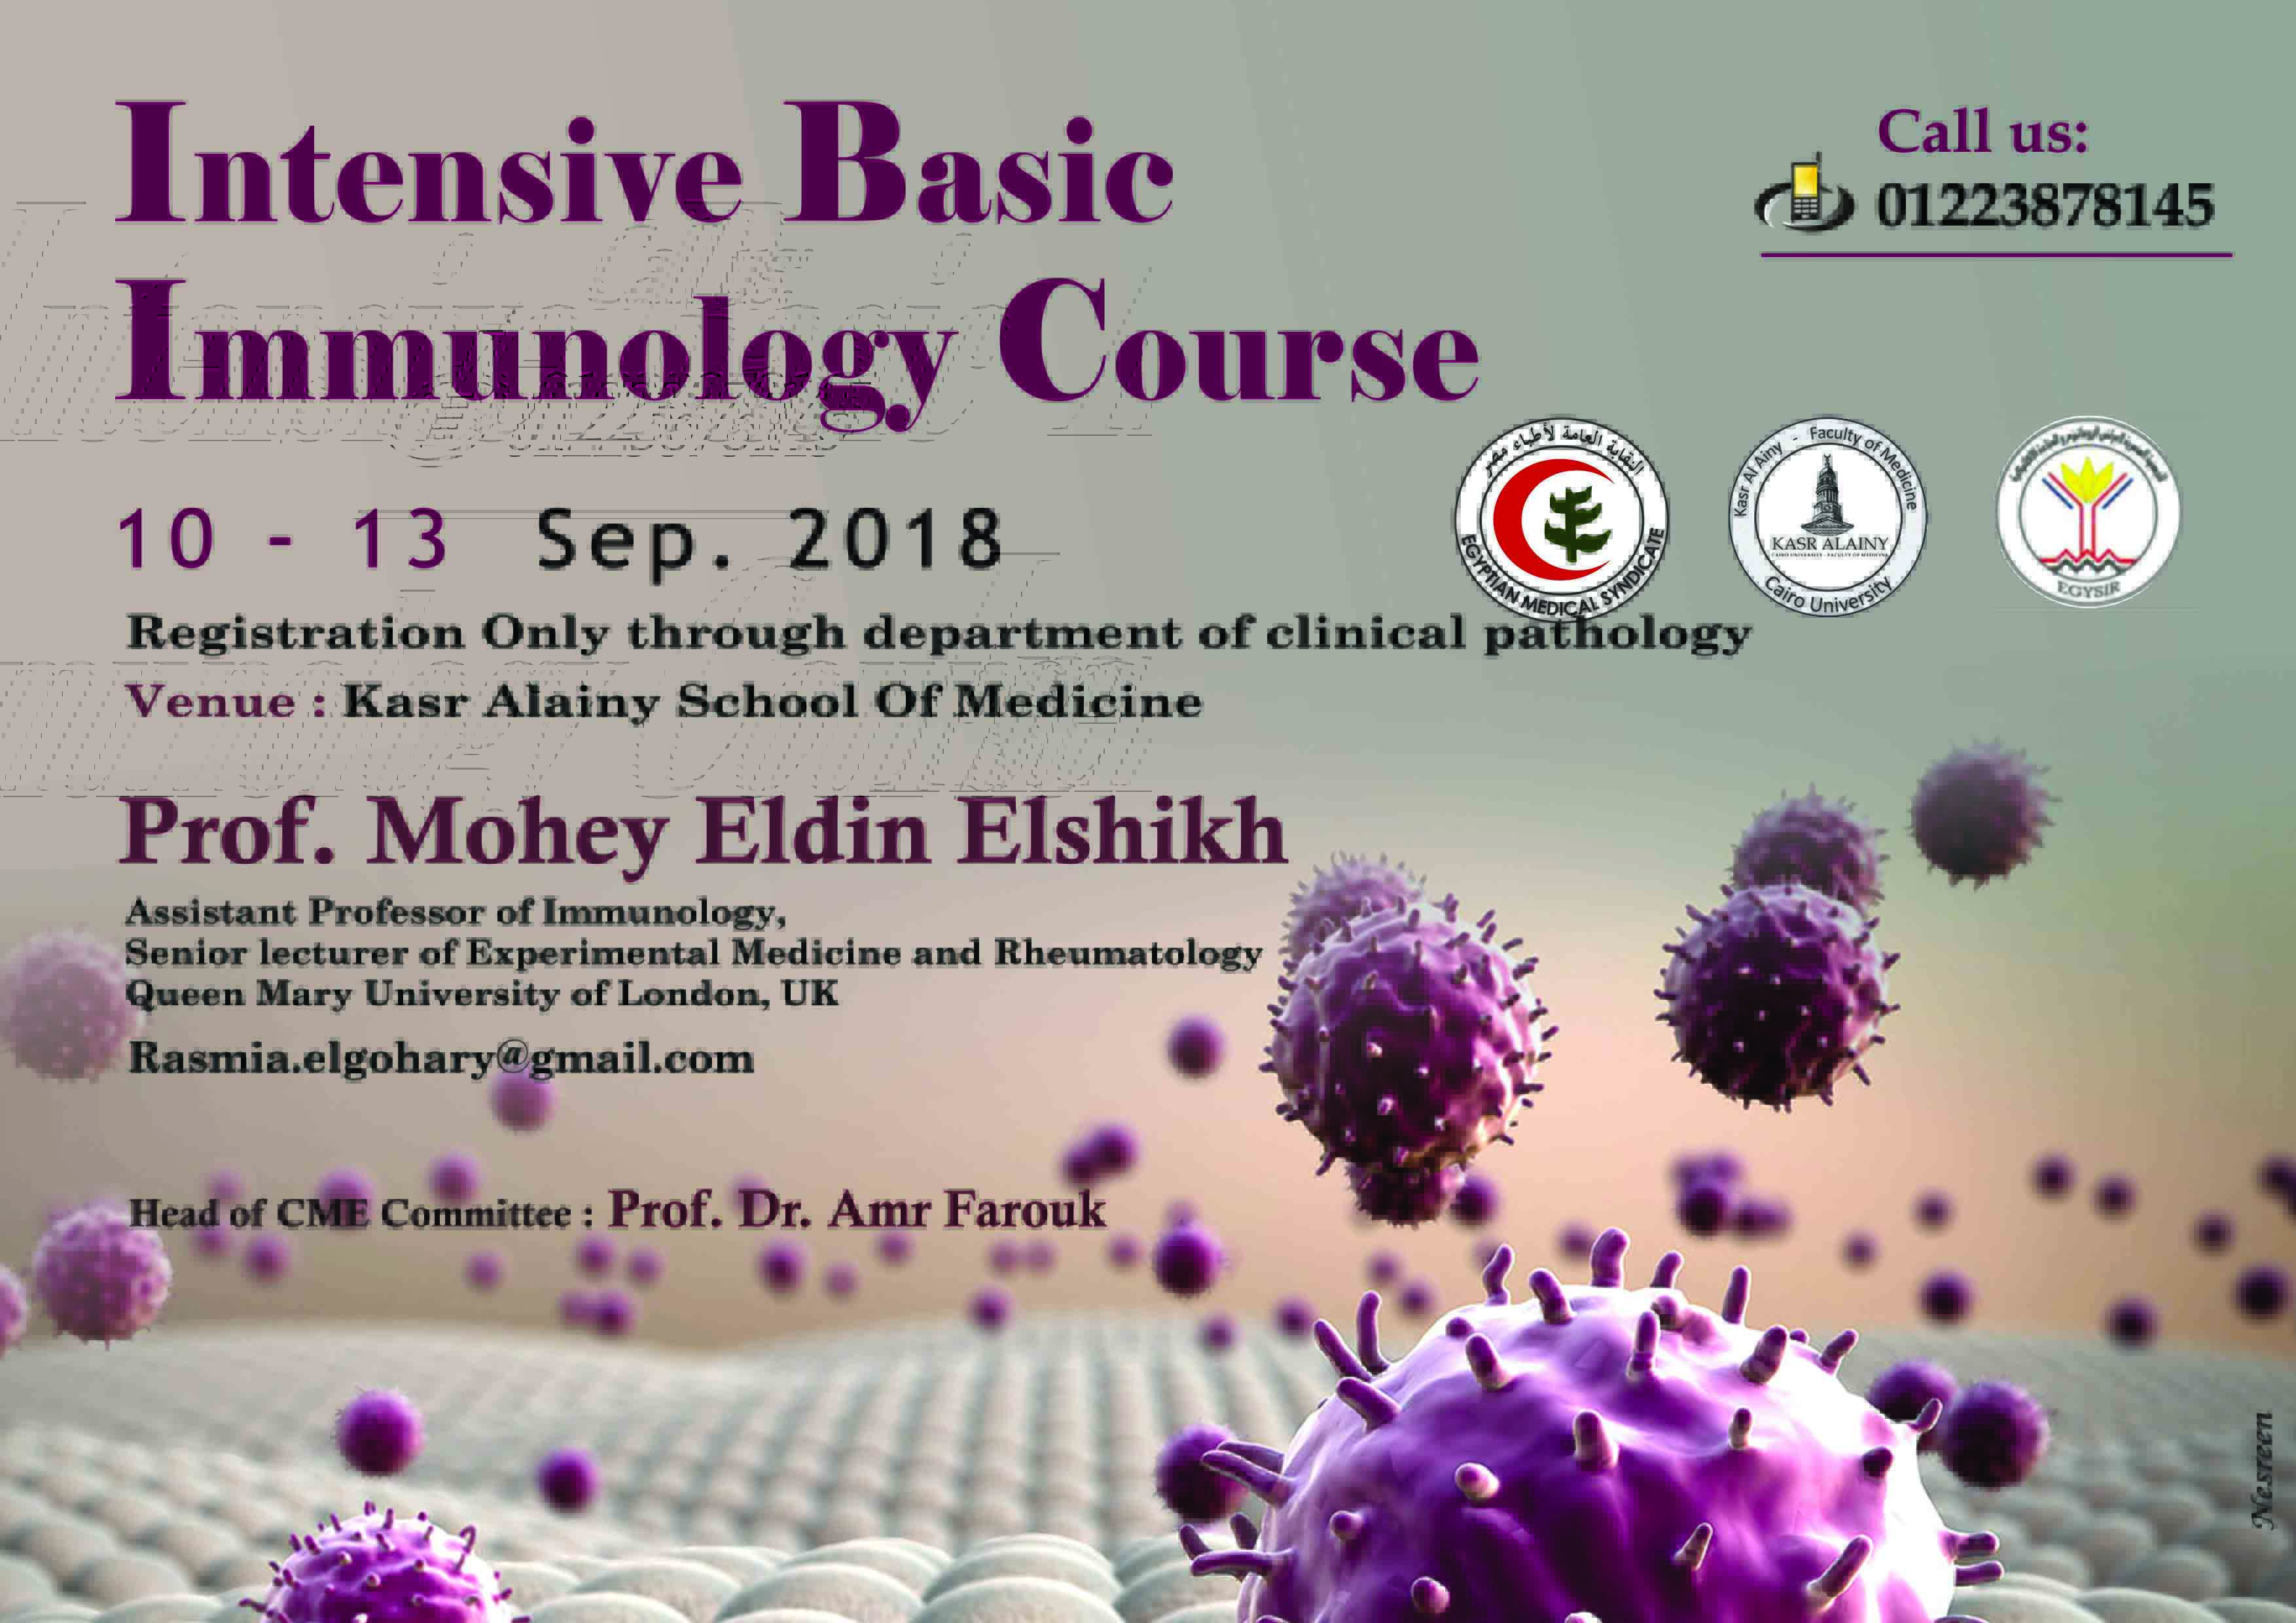 Intensive Basic Immunology Course